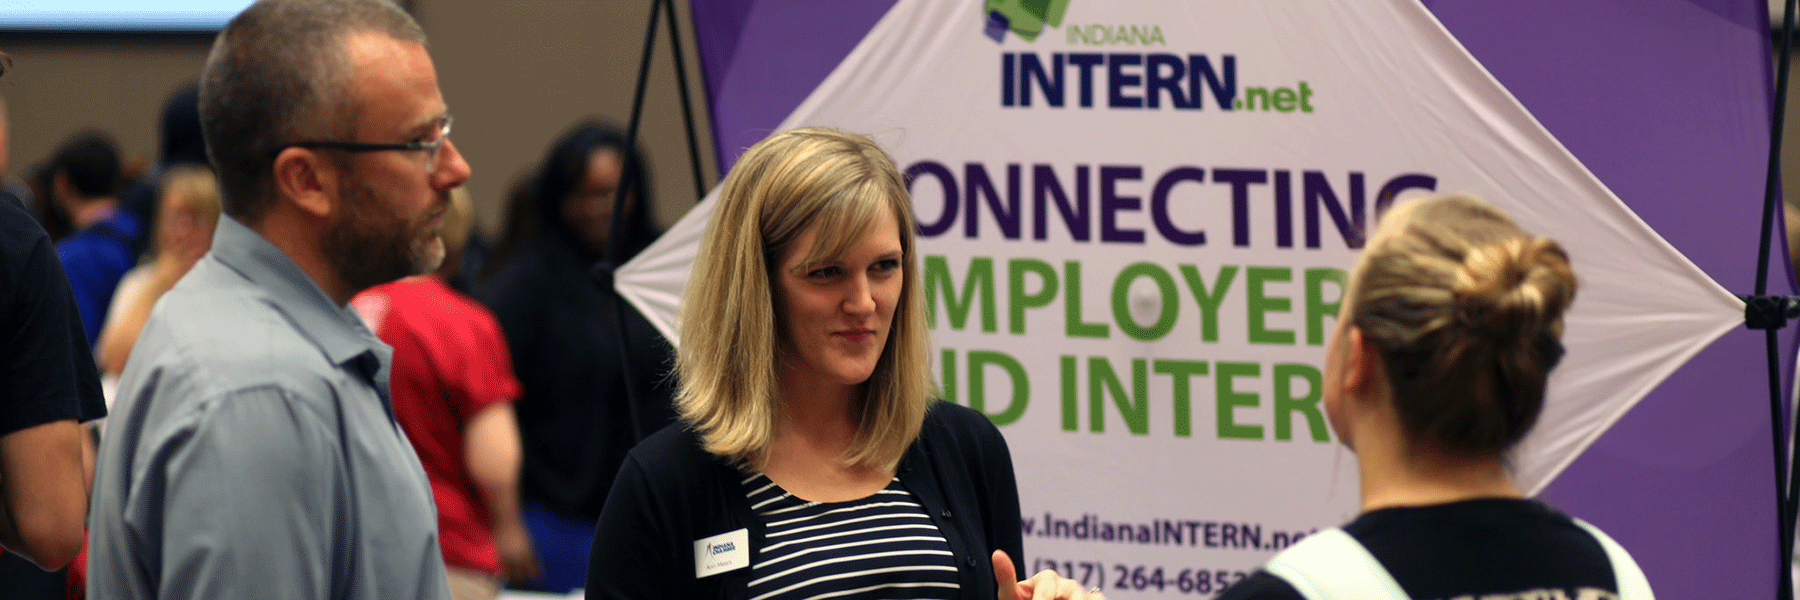 A photo of a student speaking with employers at a career event on campus.